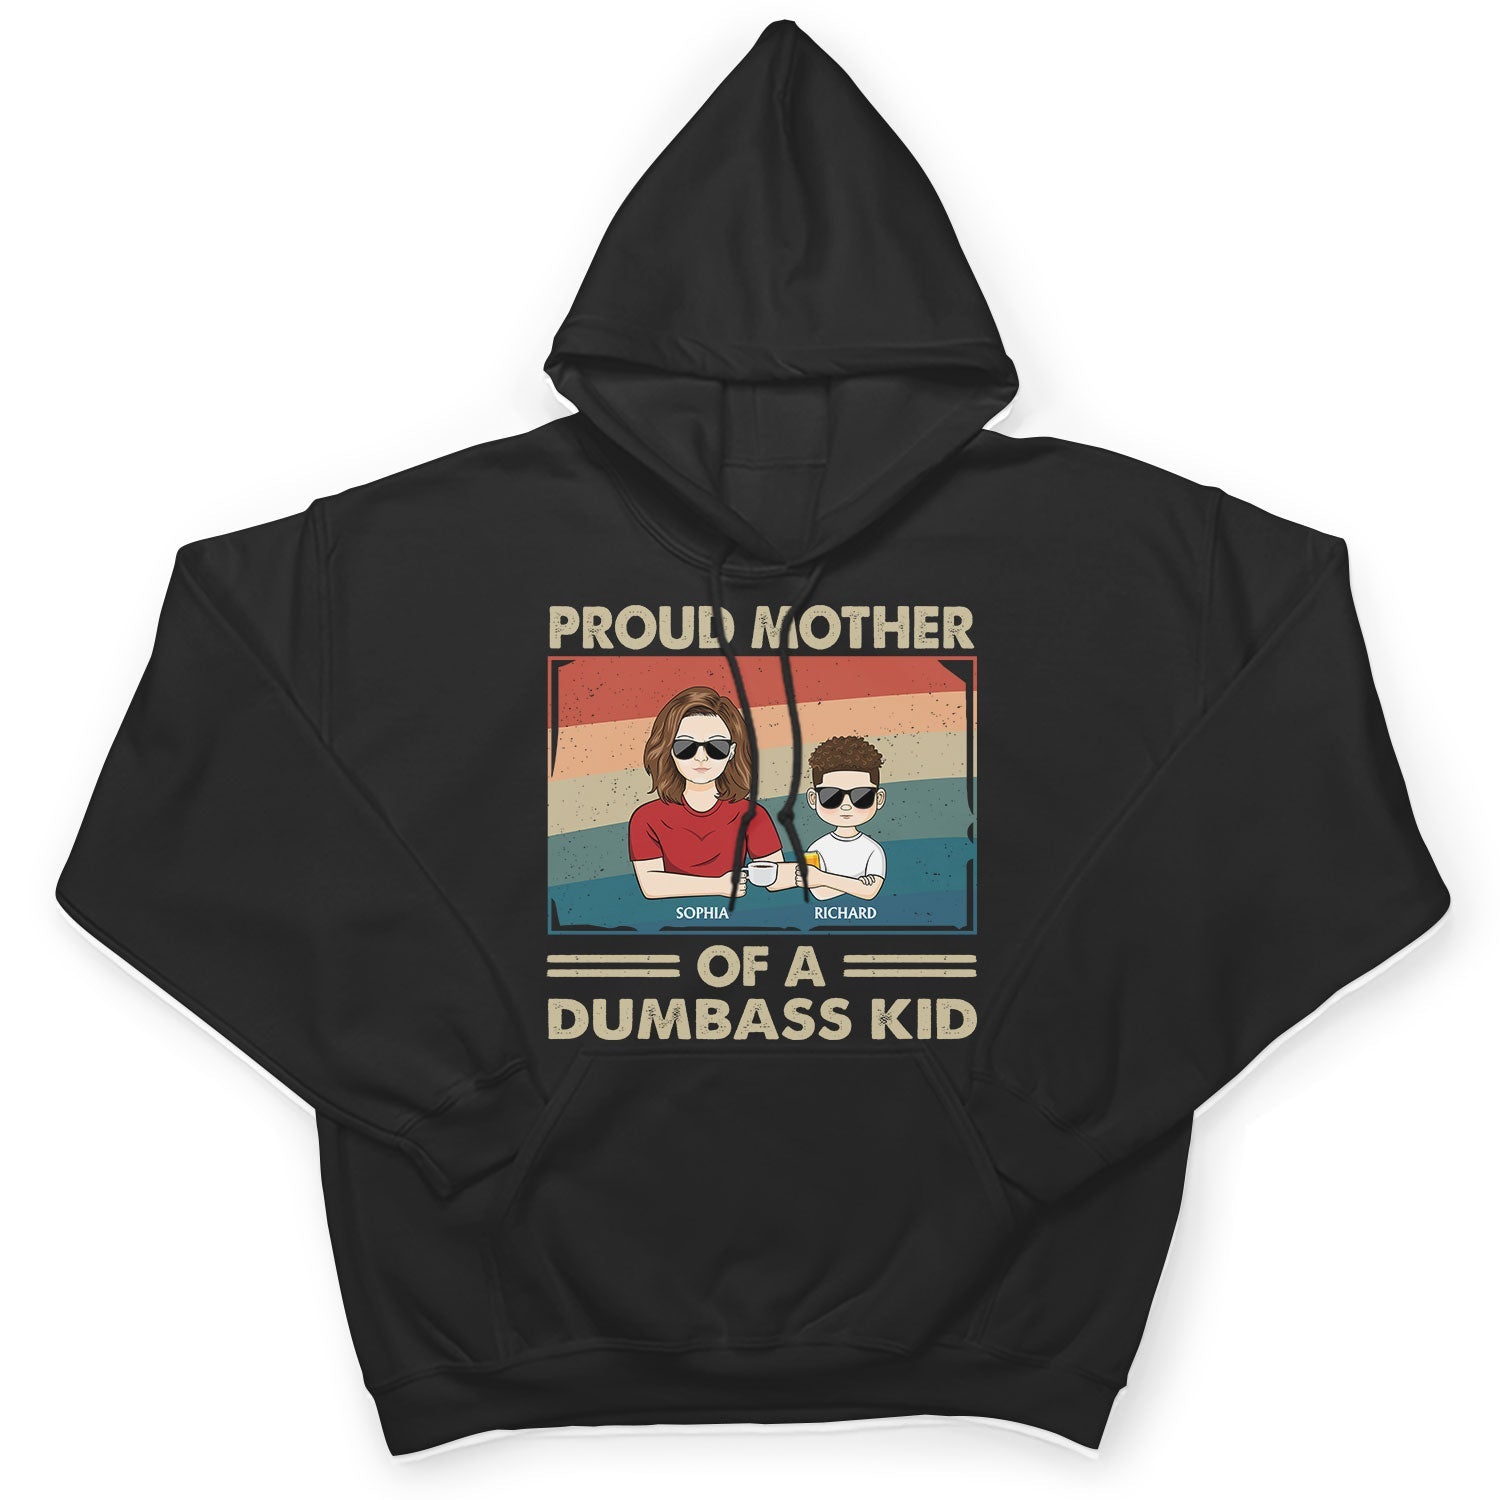 Proud Mother Of A Few - Funny Gift For Mom, Mother, Grandma - Personalized Hoodie